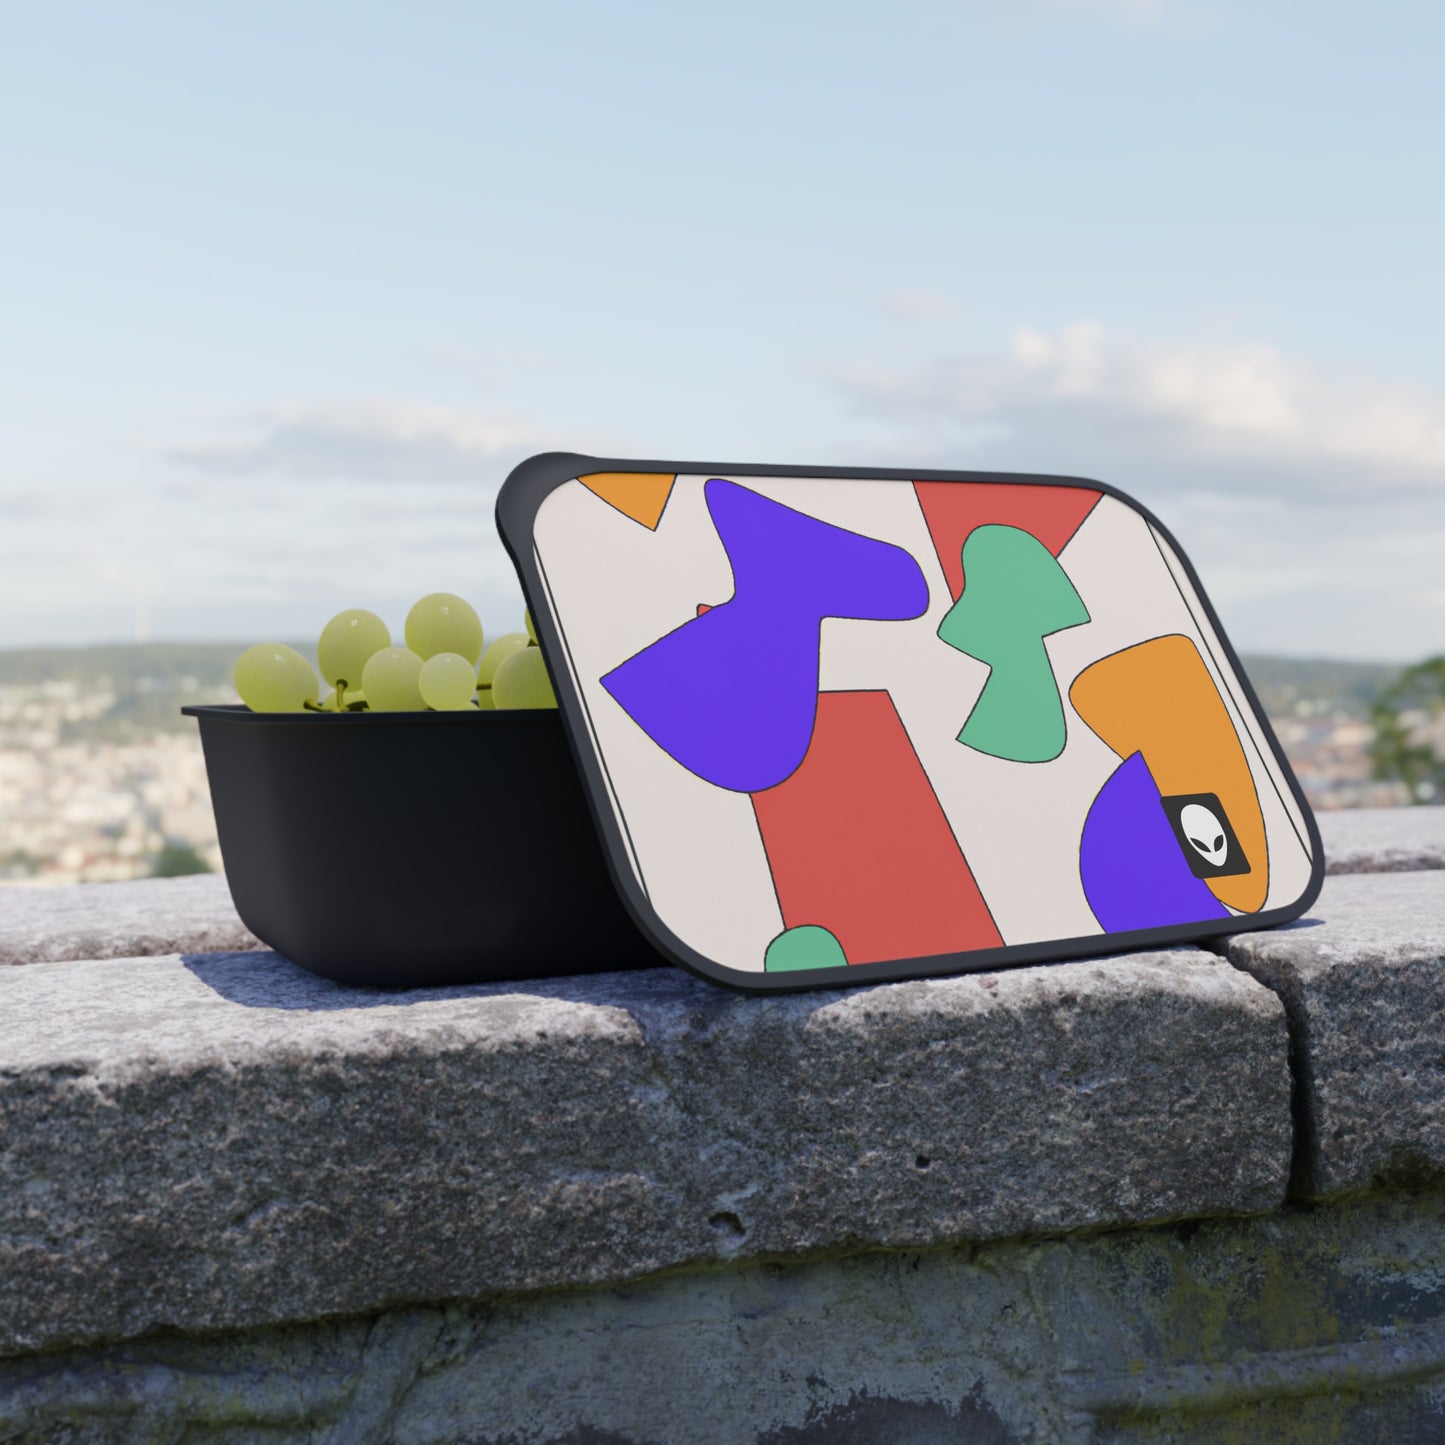 "A Beacon of Hope" - The Alien Eco-friendly PLA Bento Box with Band and Utensils